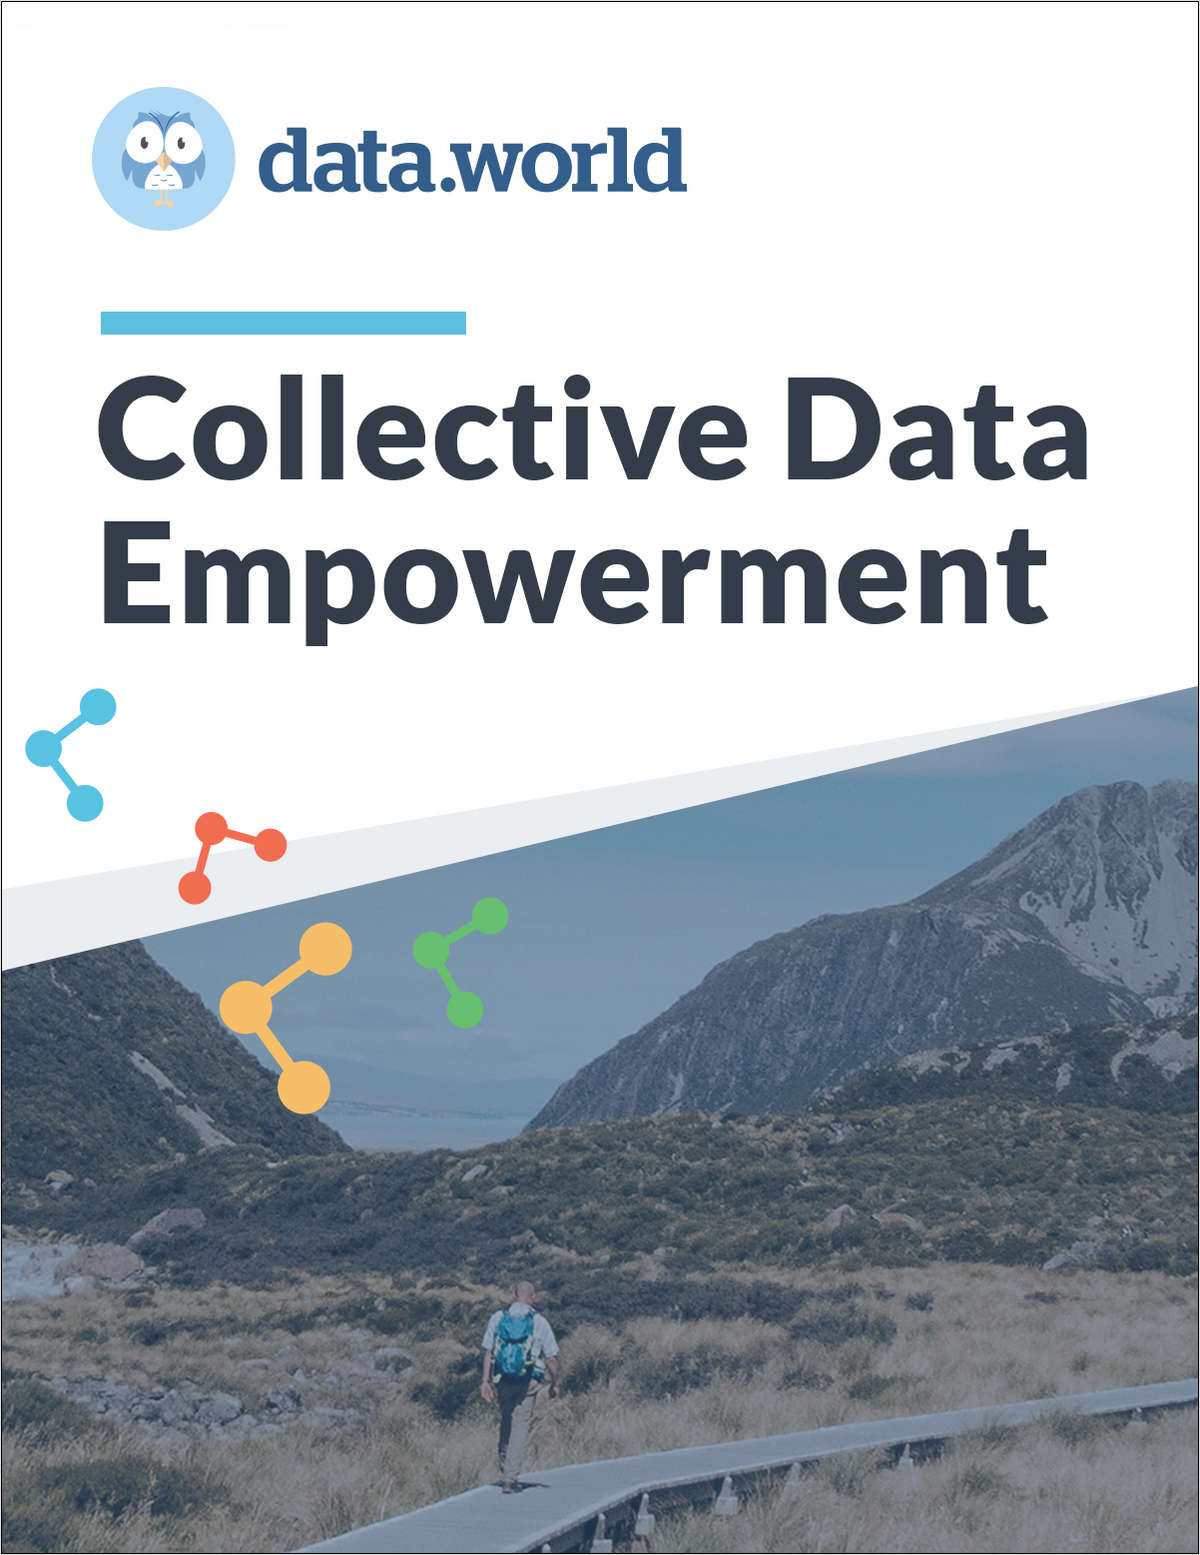 How to build a data-driven culture through Collective Data Empowerment